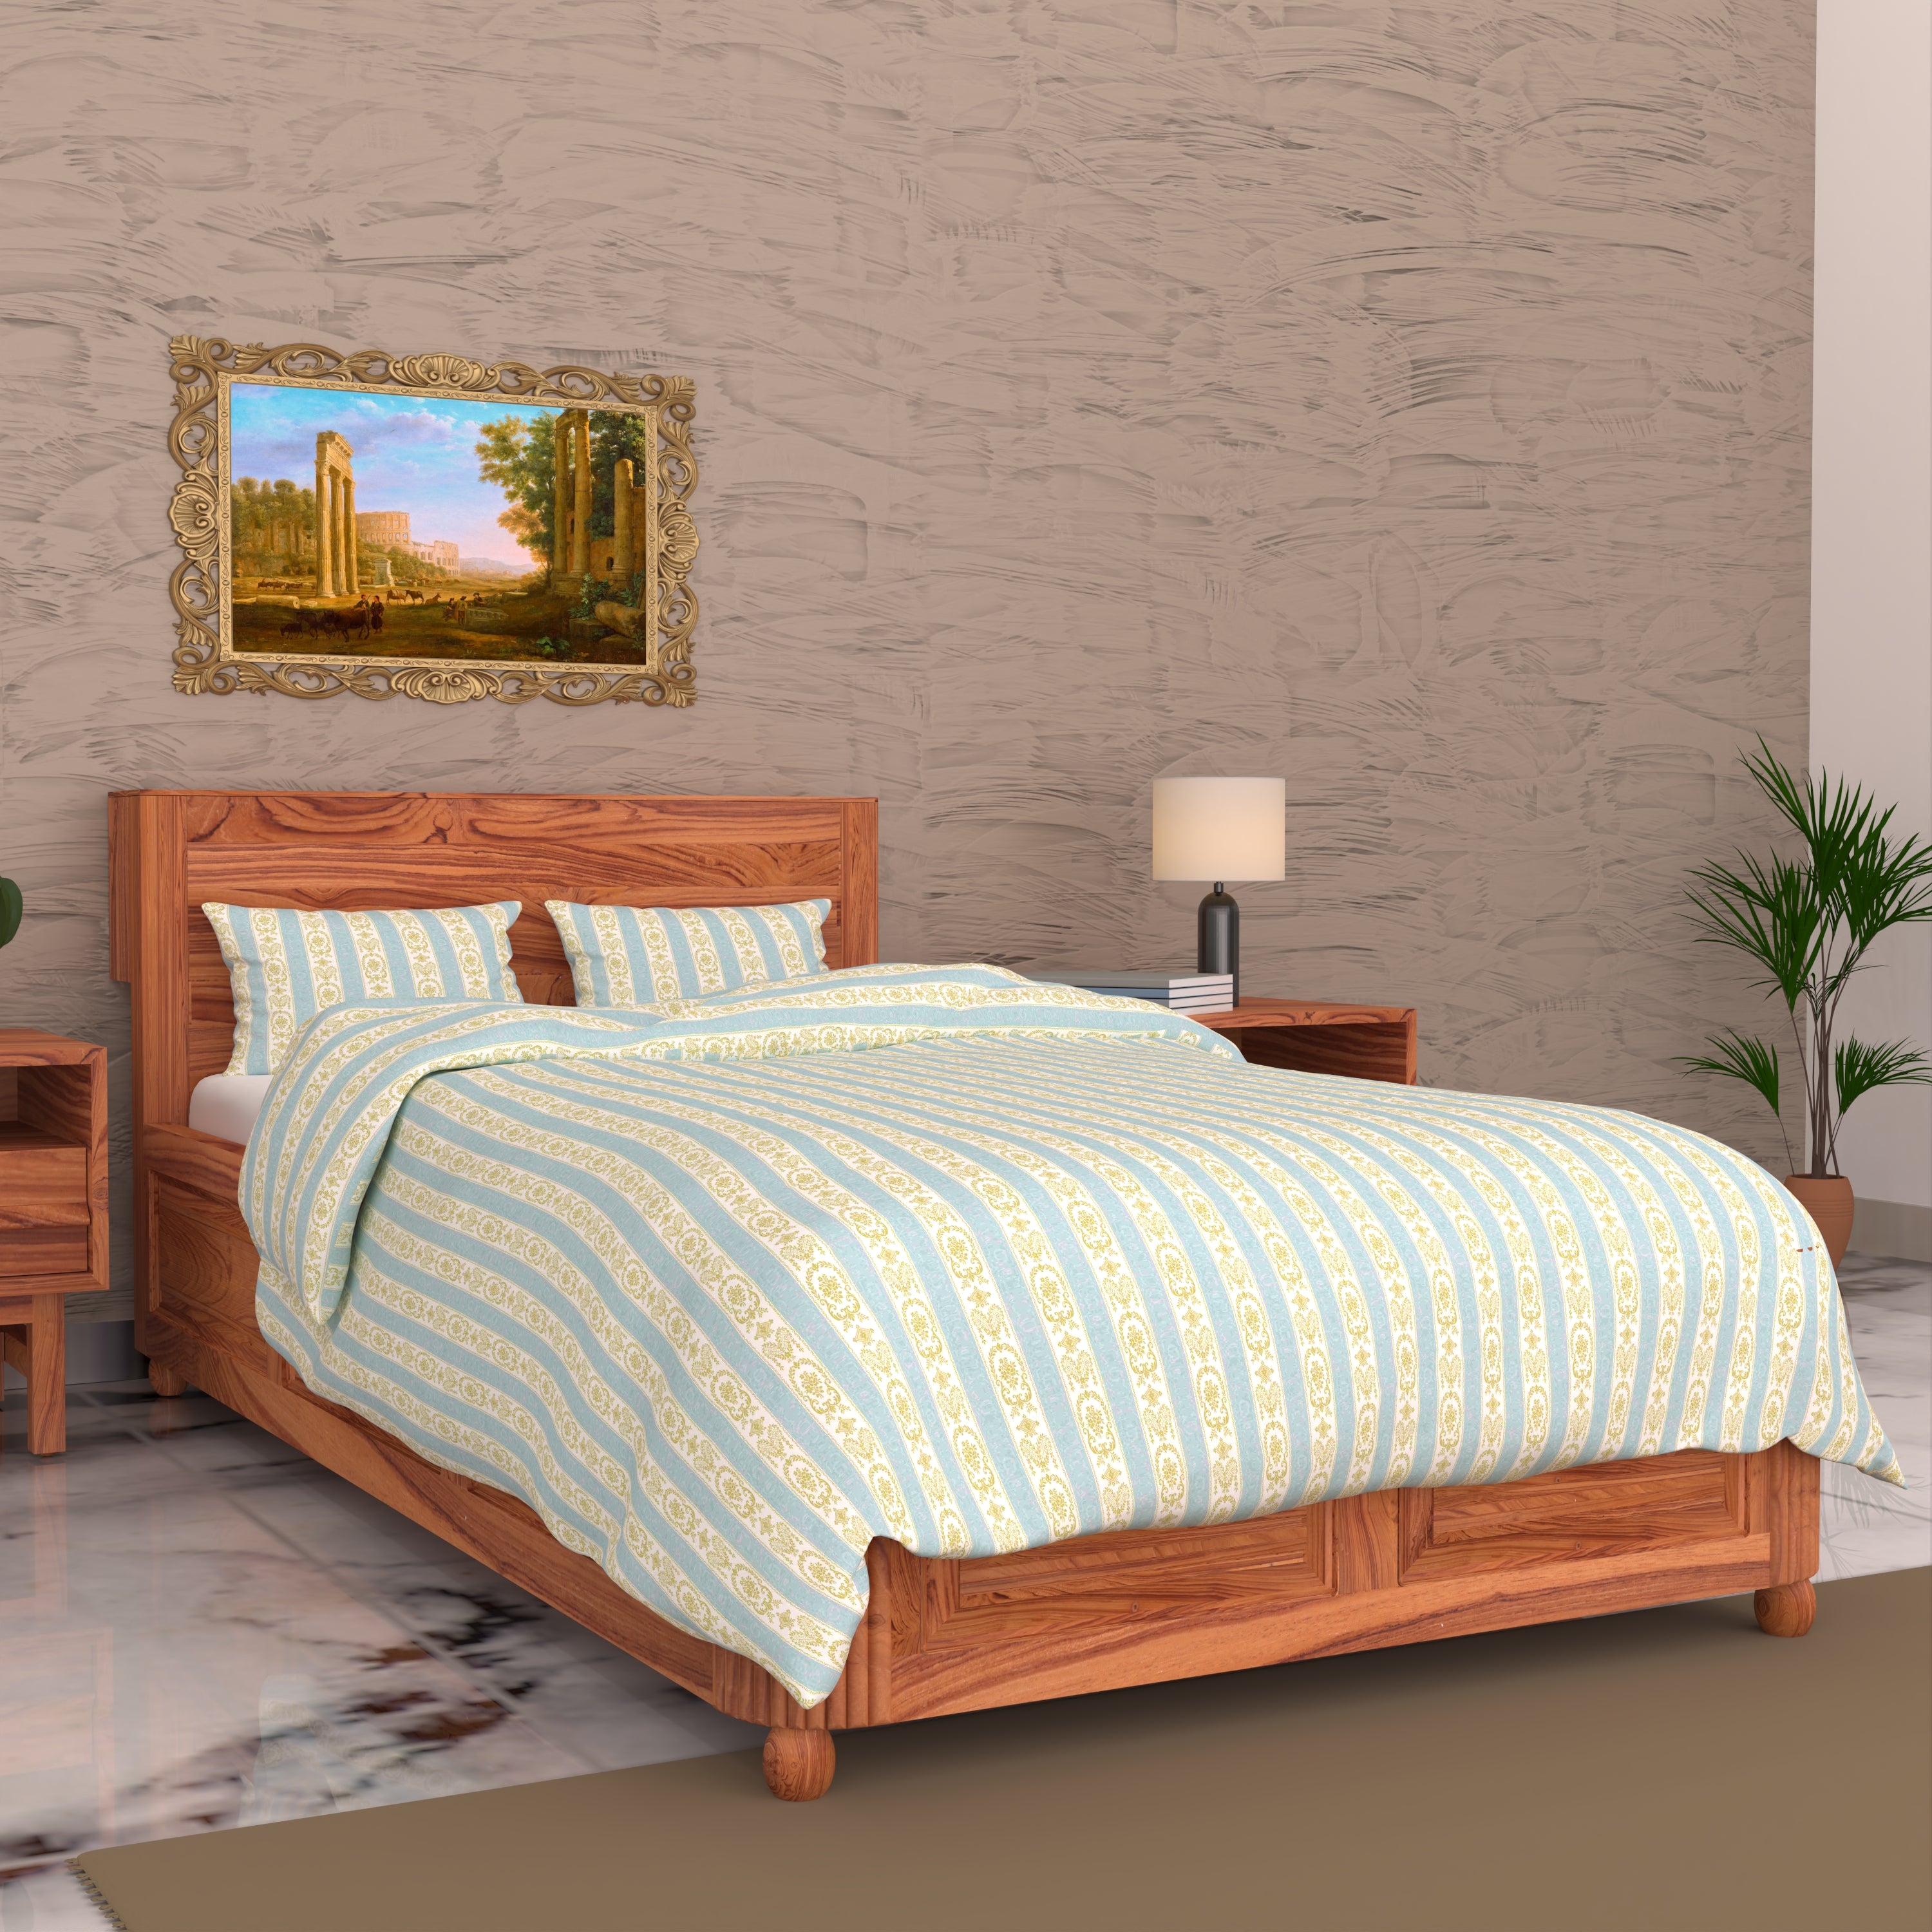 Bali Inspired Single person Bed Bed